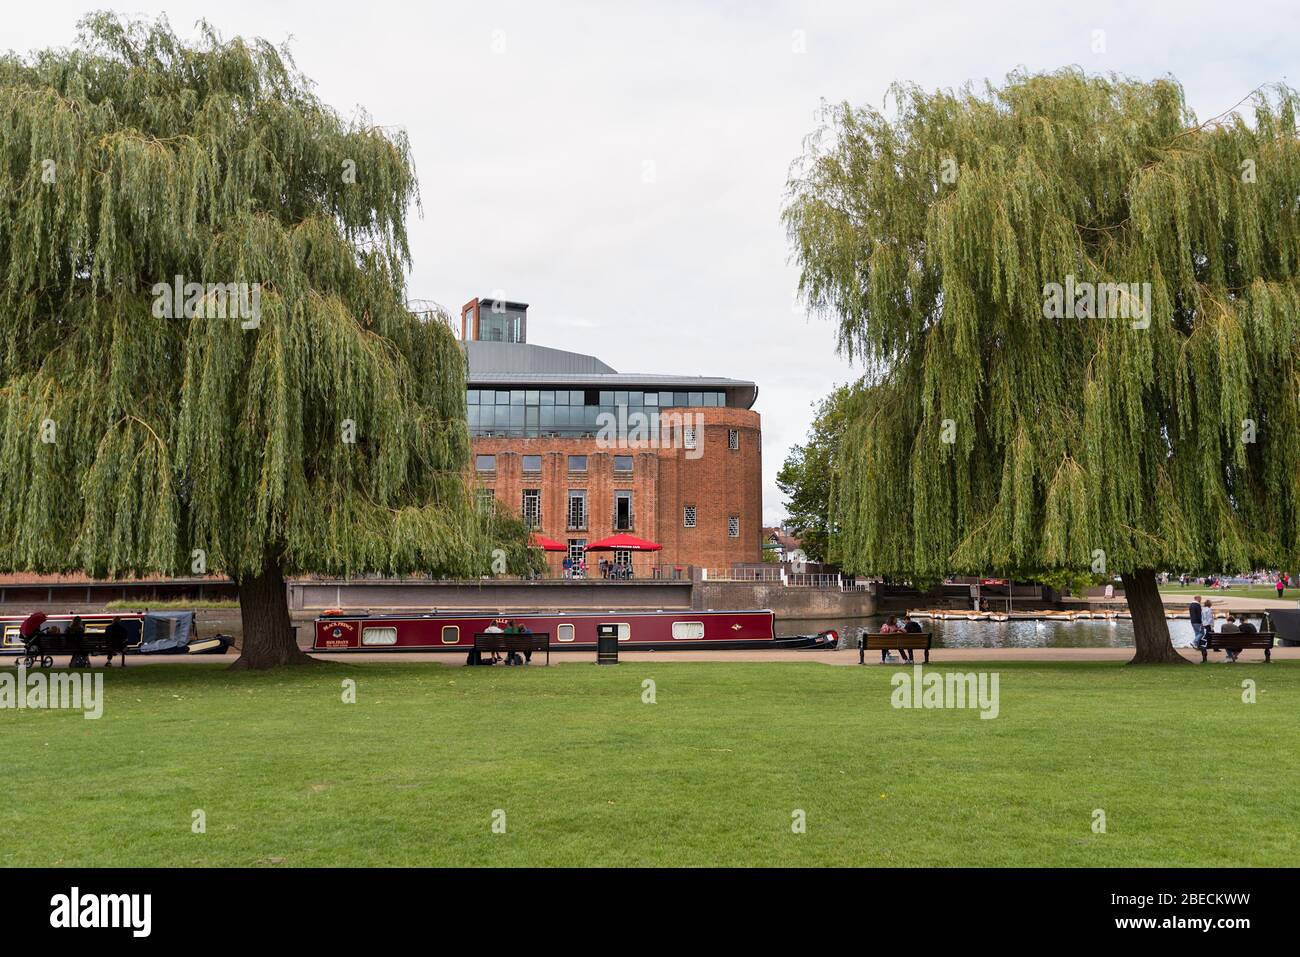 The landmark Royal Shakespeare theatre of Stratford on Avon viewed across the river Avon with canal boat and willow trees. Stock Photo